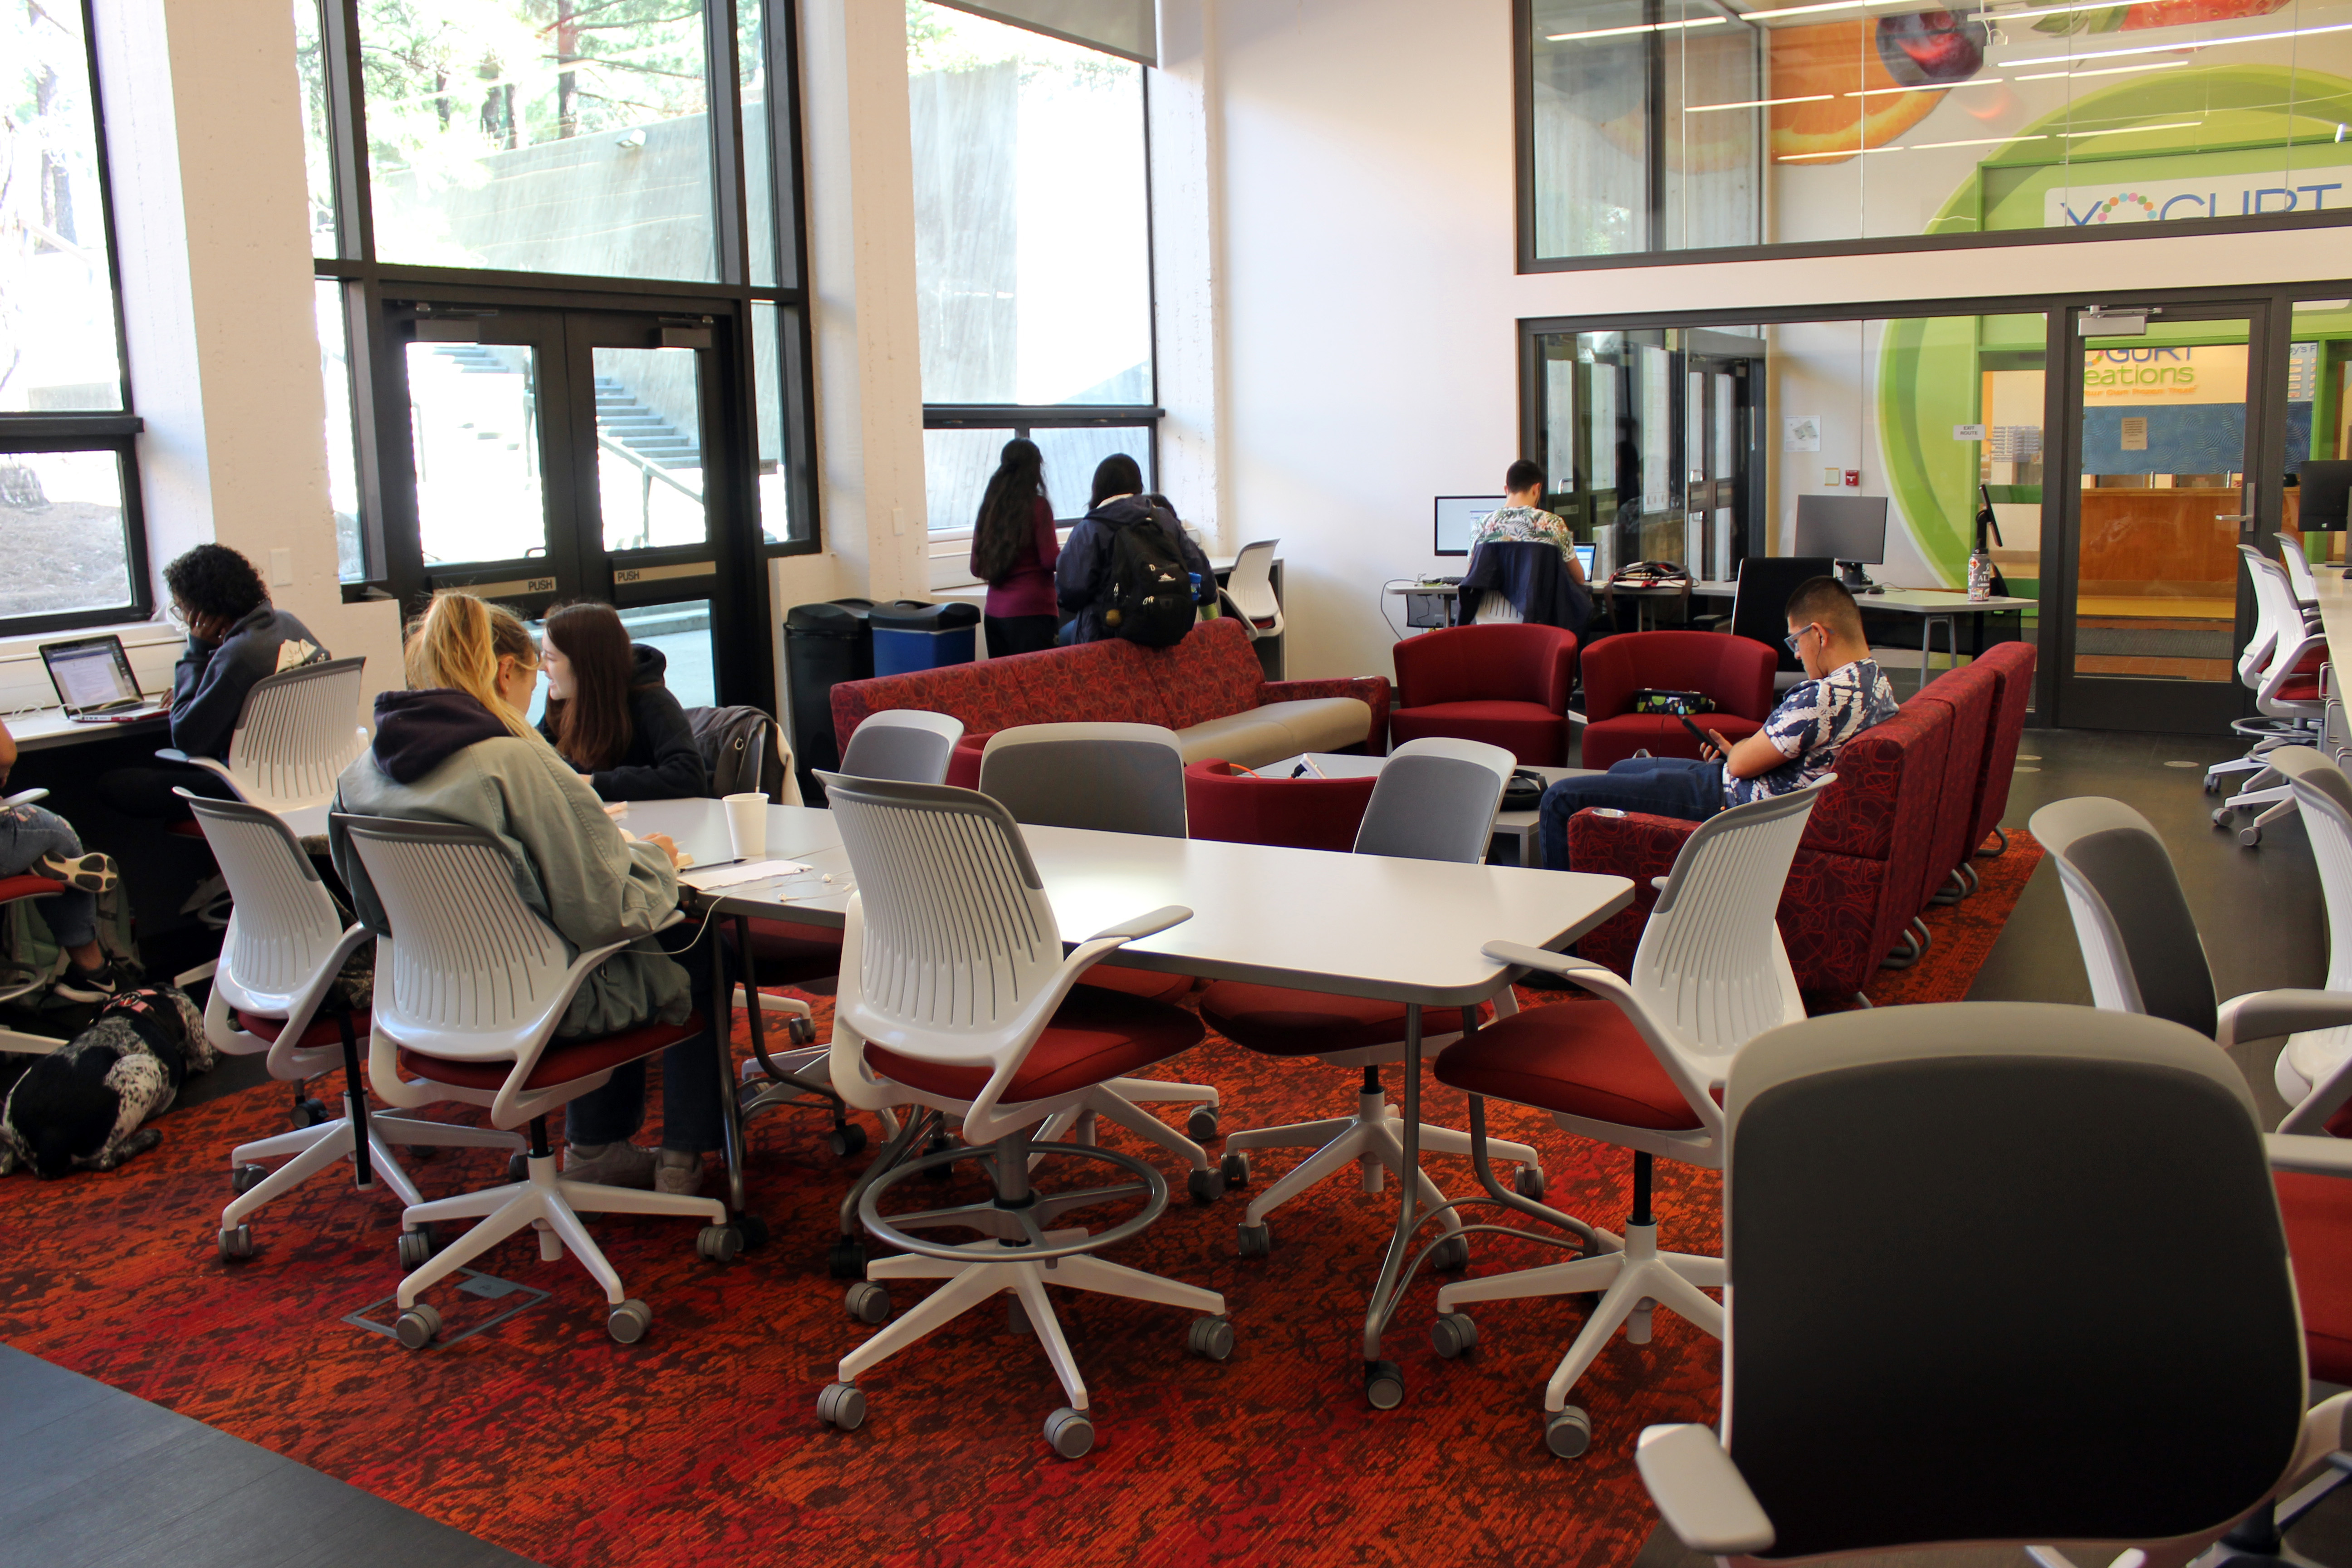 Students sit while studying and on their phones in red lounge chairs in the new MultiCultural Center